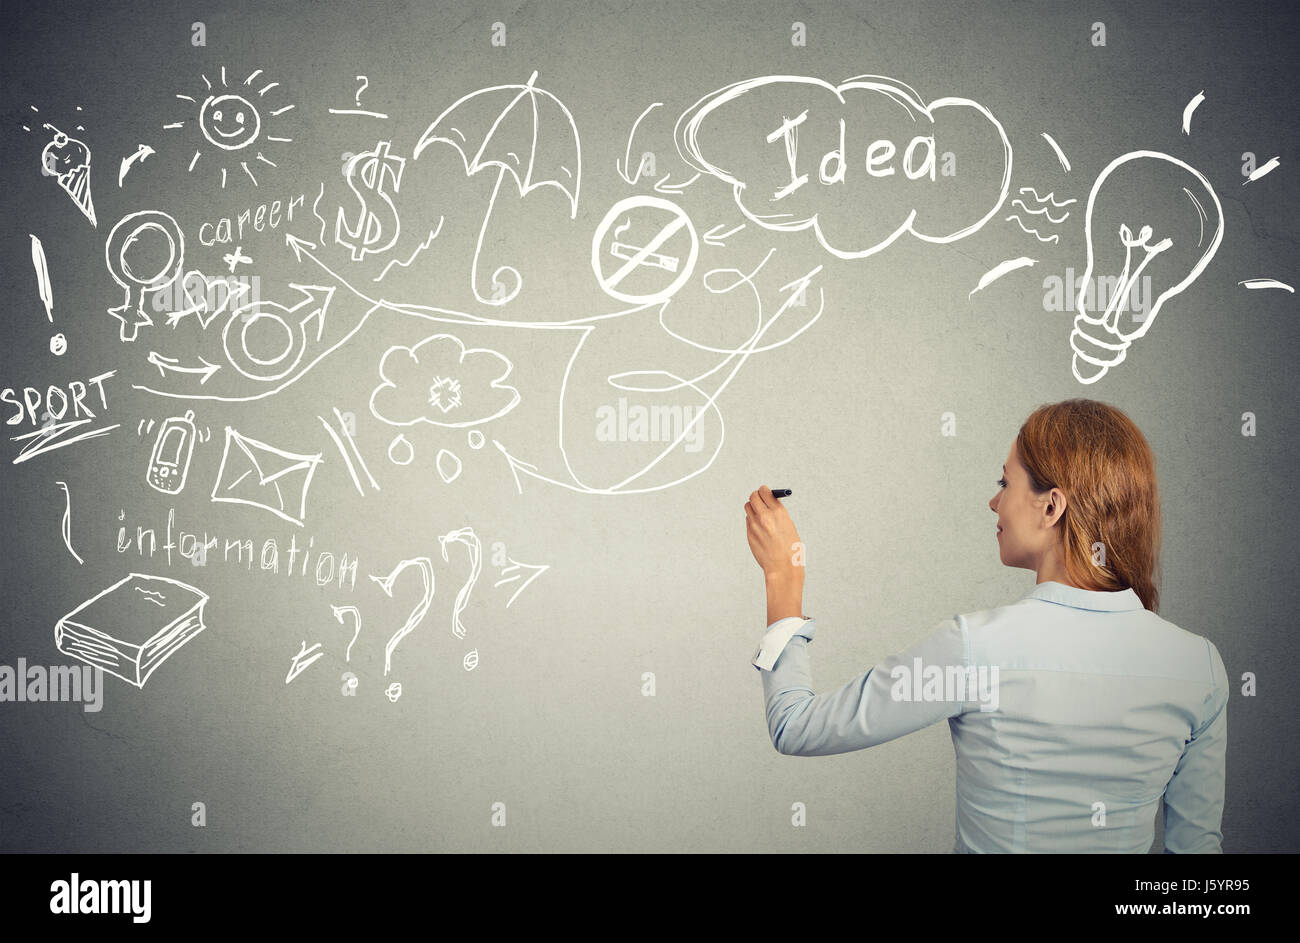 Back side view business woman writing with pen many ideas on grey wall blackboard planning future. Perception vision priorities career personal life b Stock Photo